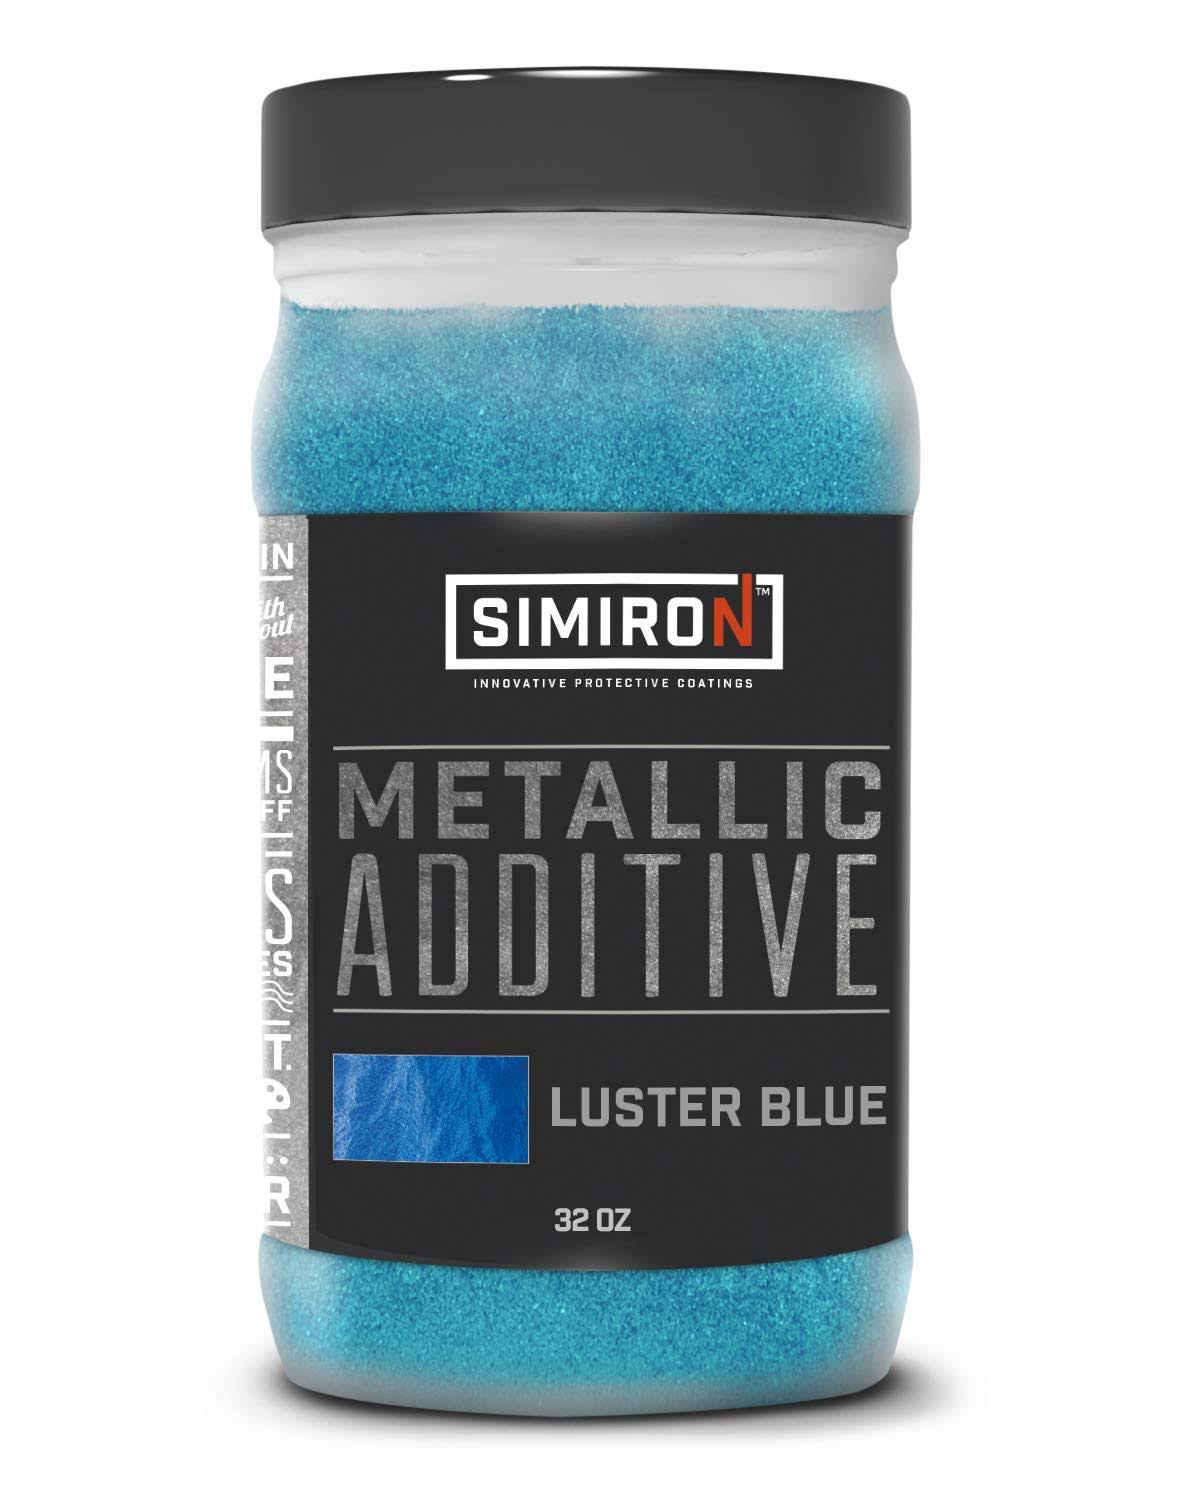 Simiron Metallic Additive for Clear Epoxy, Luster Blue